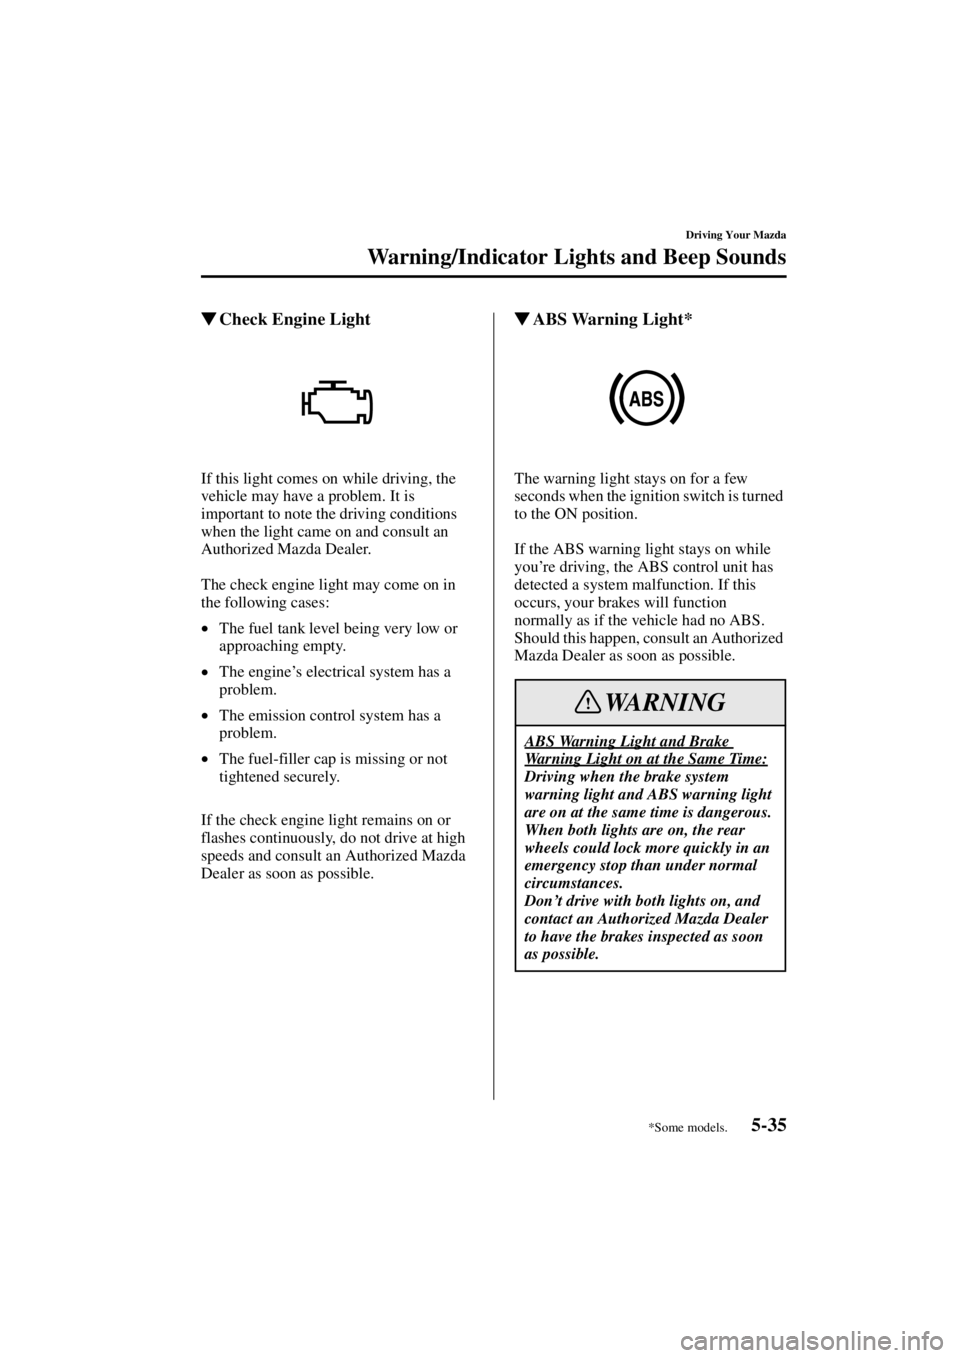 MAZDA MODEL 3 5-DOOR 2004 User Guide 5-35
Driving Your Mazda
Warning/Indicator Lights and Beep Sounds
Form No. 8S18-EA-03I
Check Engine Light
If this light comes on while driving, the 
vehicle may have a problem. It is 
important to not